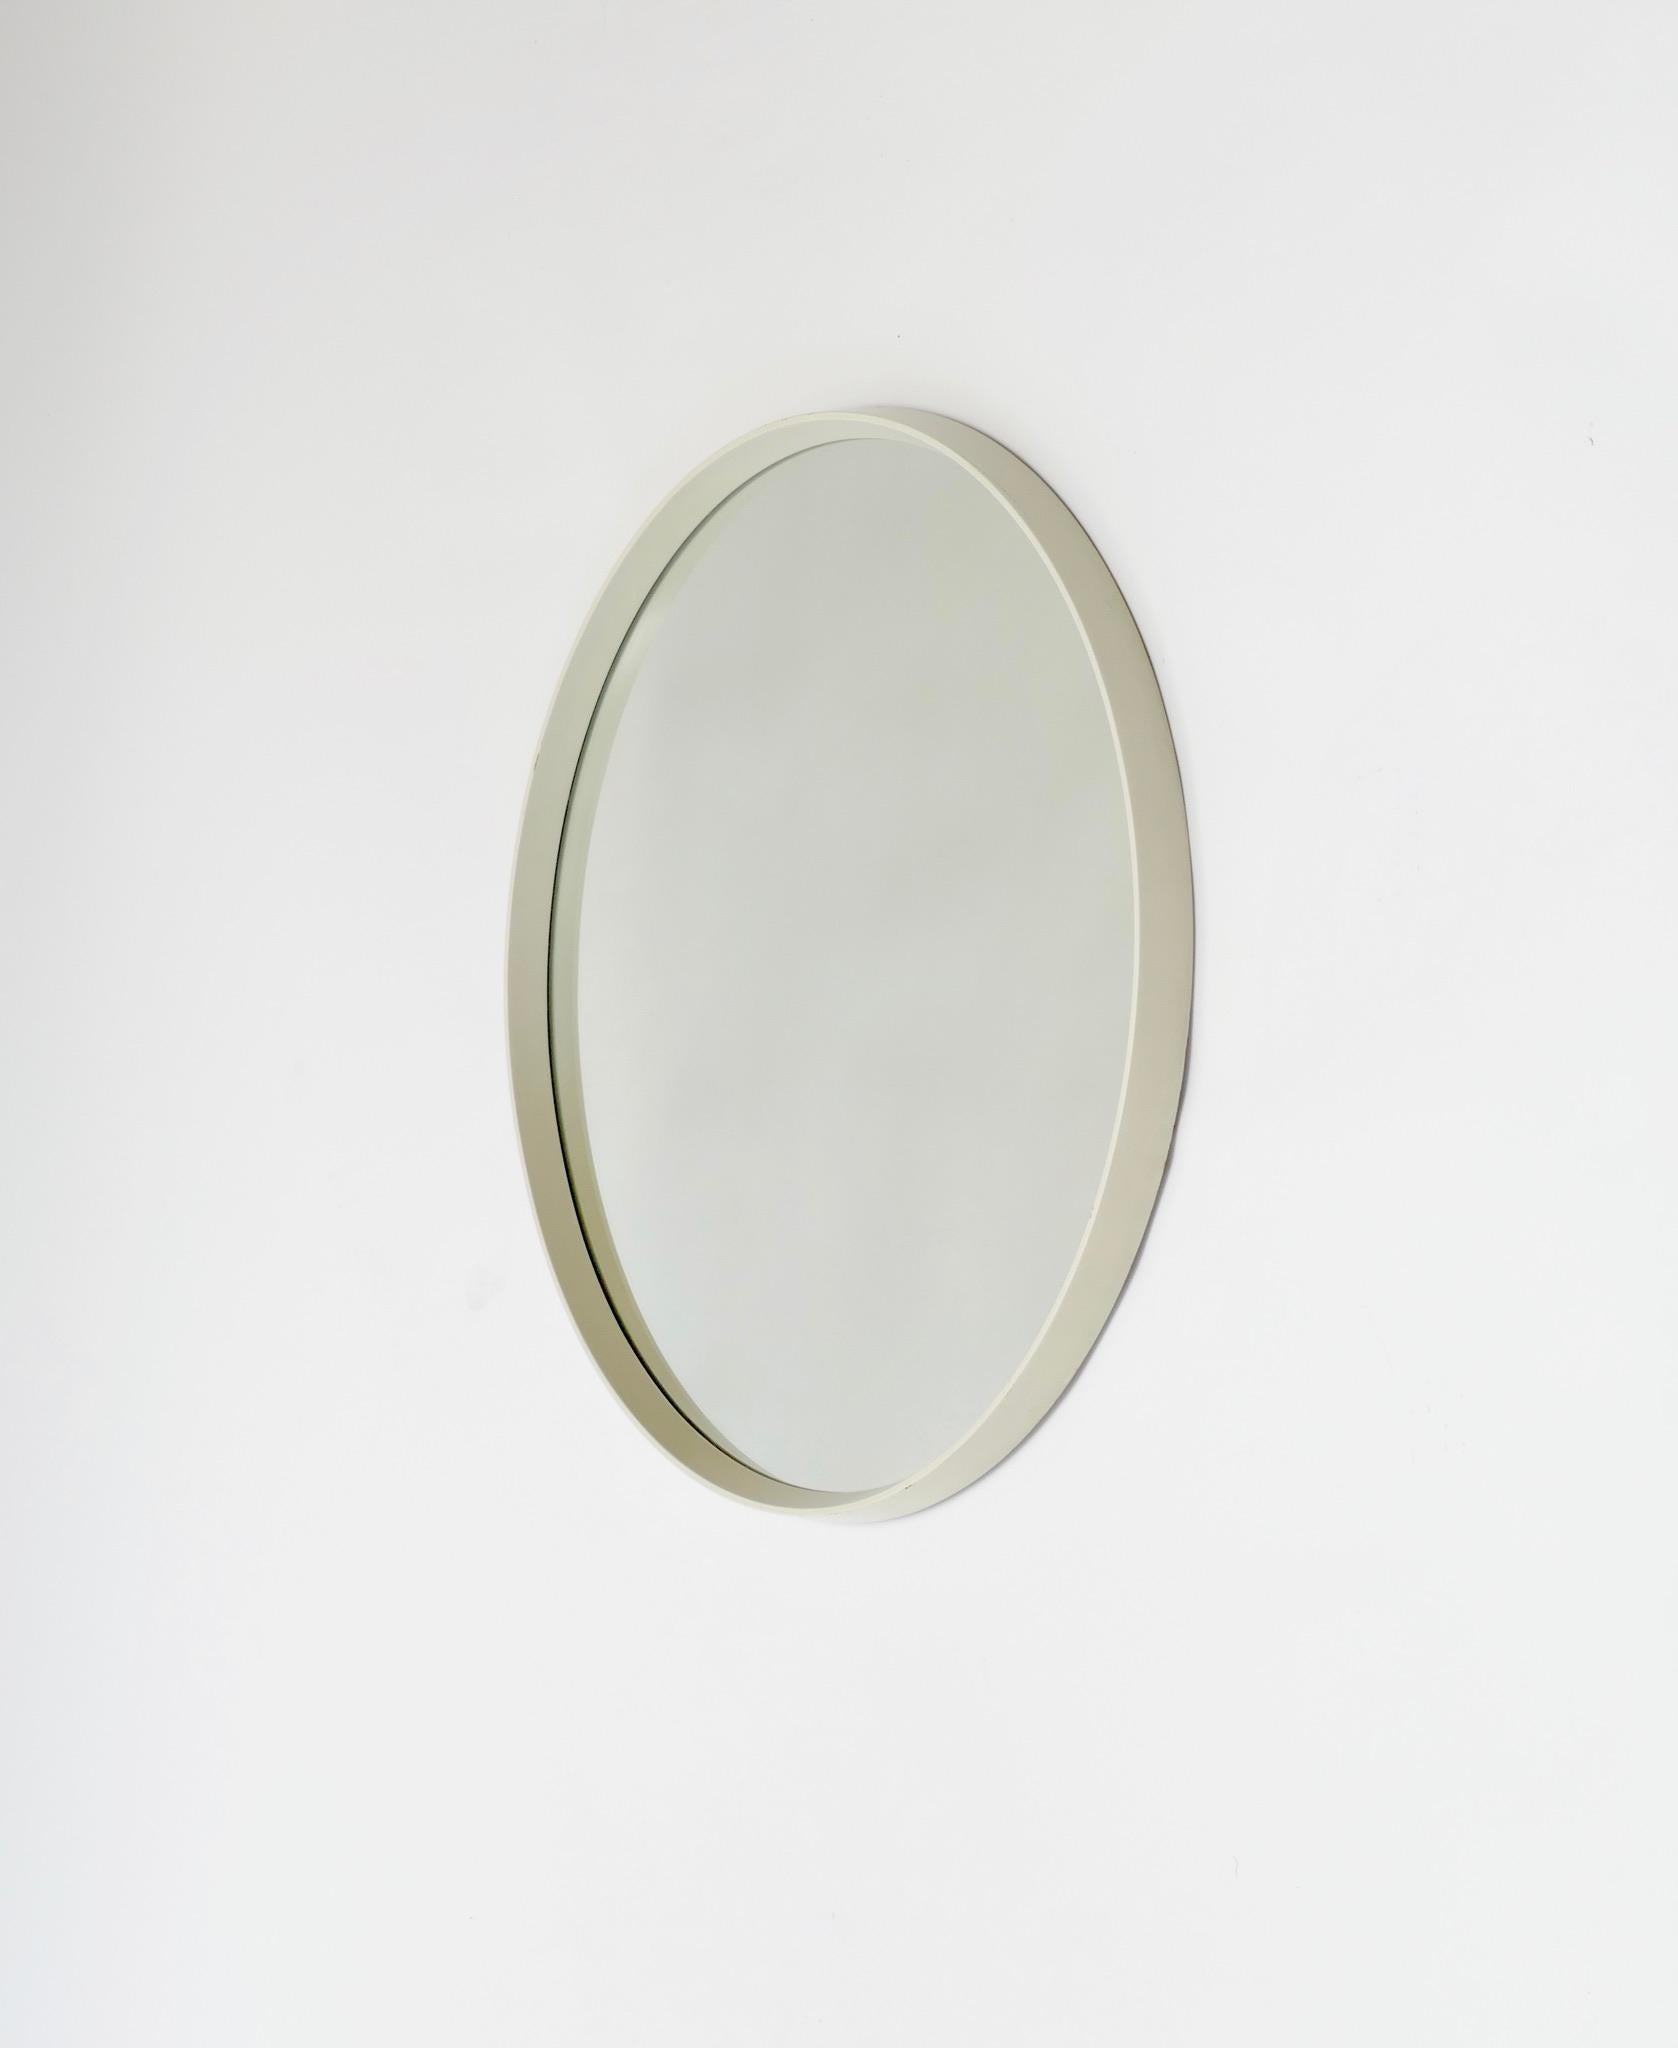 Round mirror with a wood white lacquered frame, Germany 1970s. 
There are similar items to see in my seller page 
